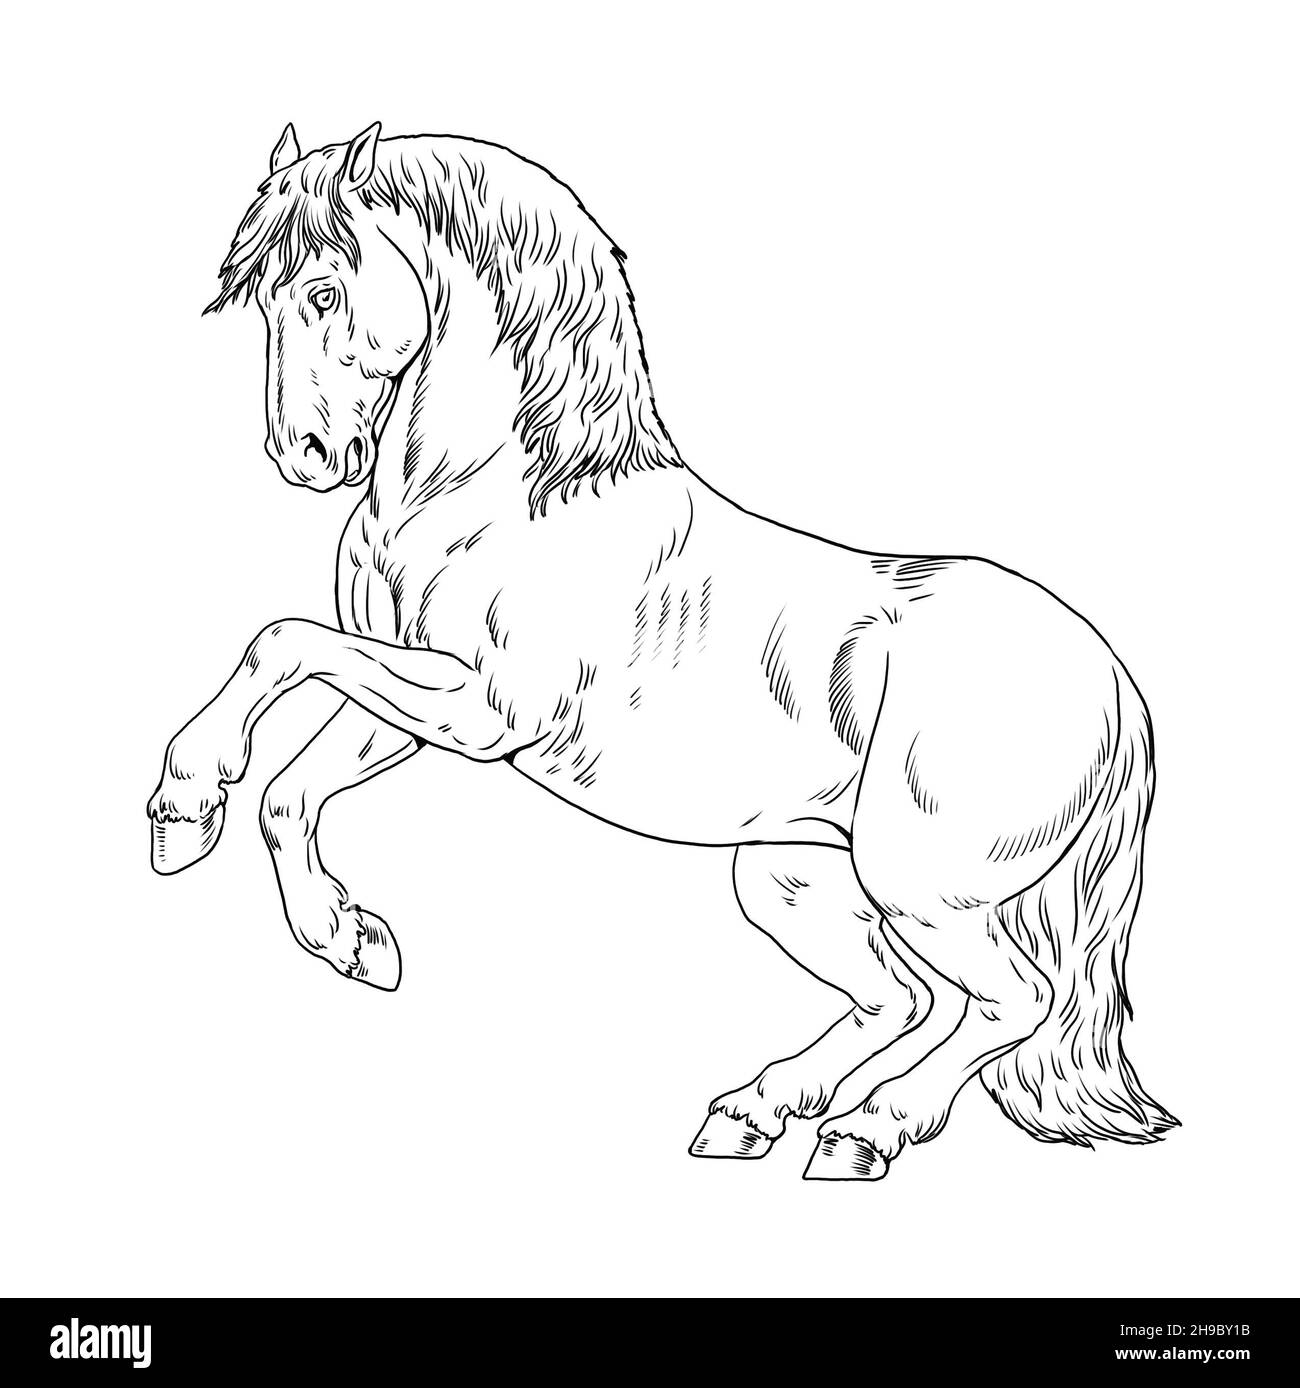 Drawing of rearing horse. Coloring book template with a horse. Equine drawing. Stock Photo